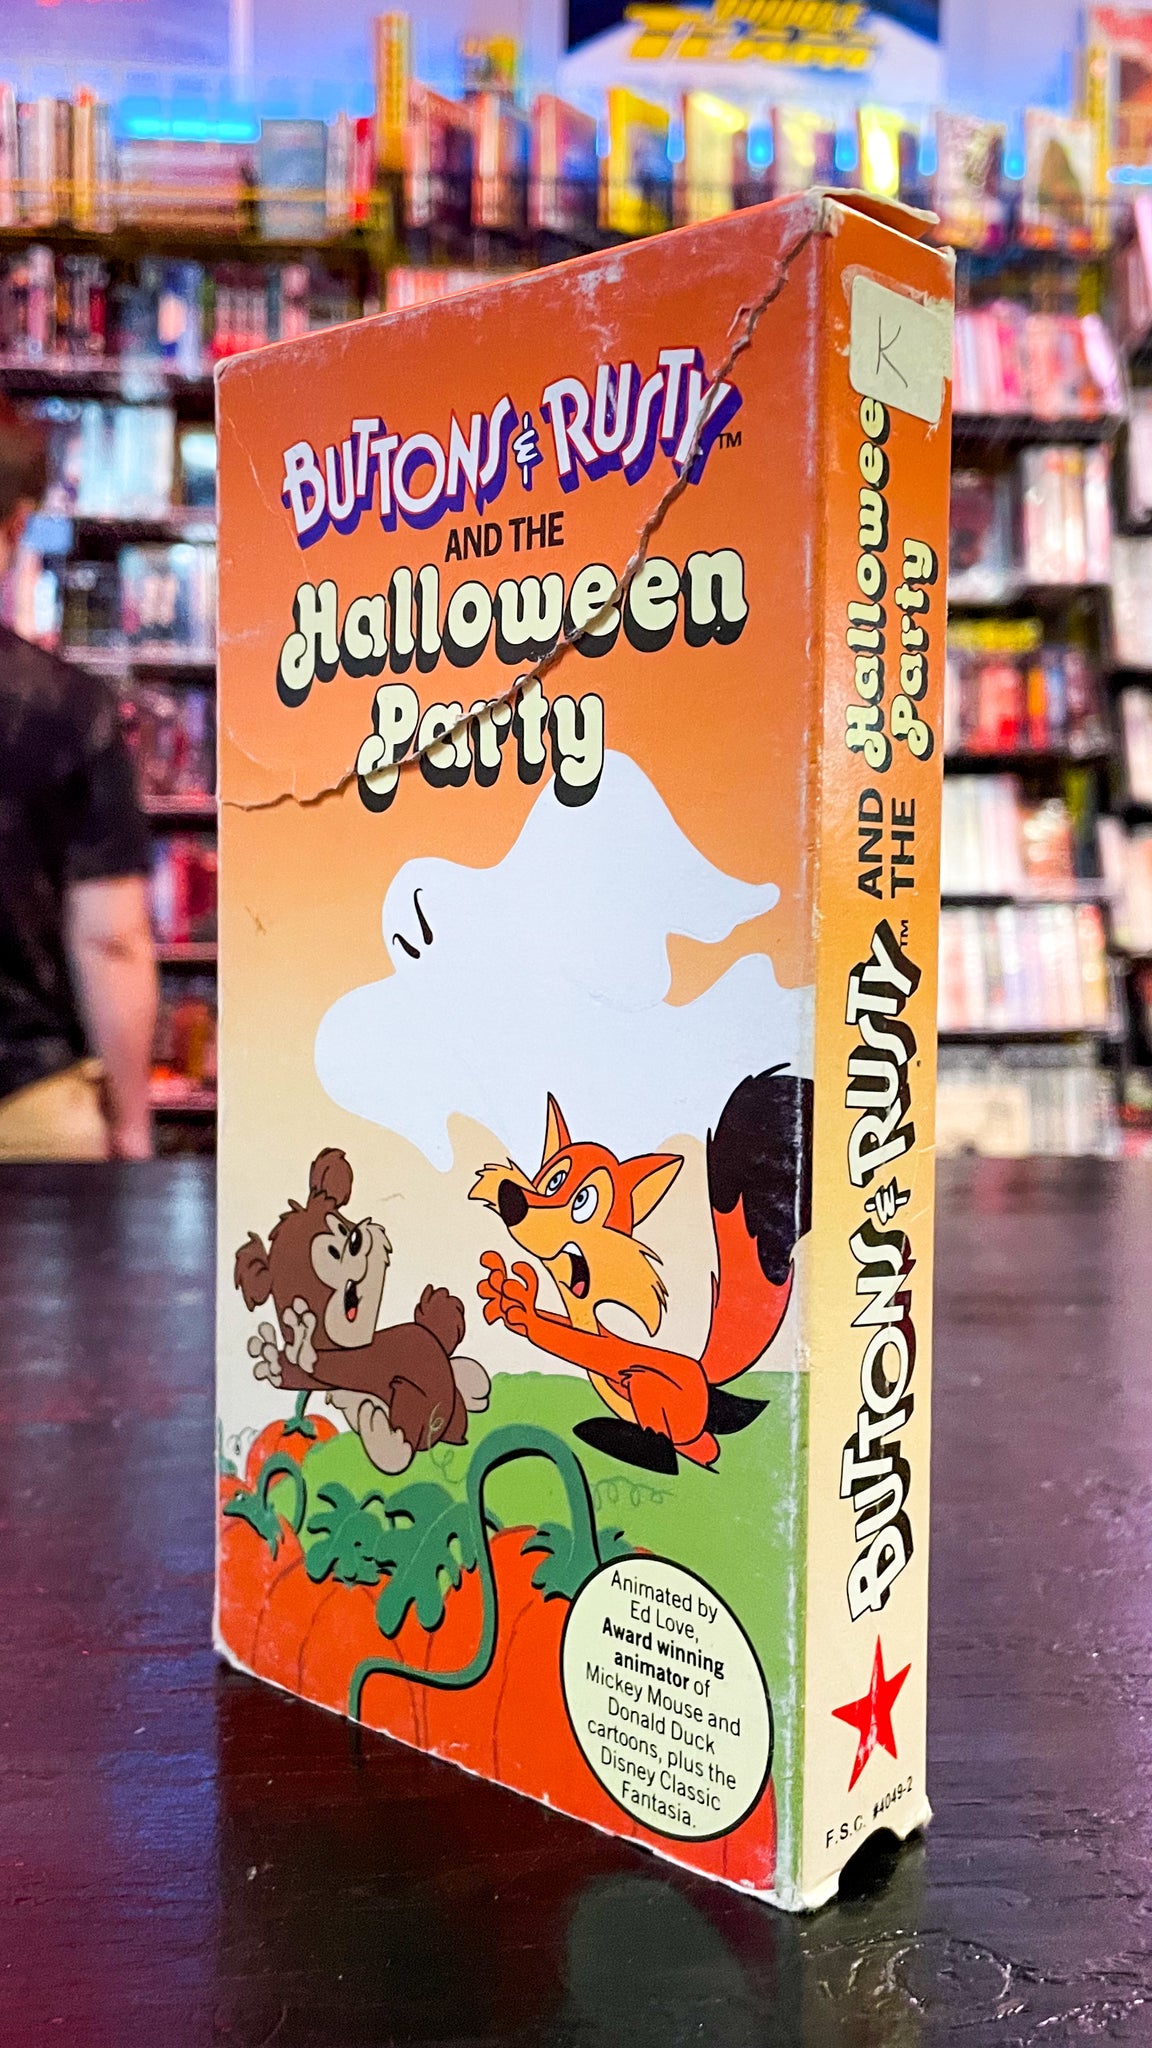 Buttons & Rusty and the Halloween Party